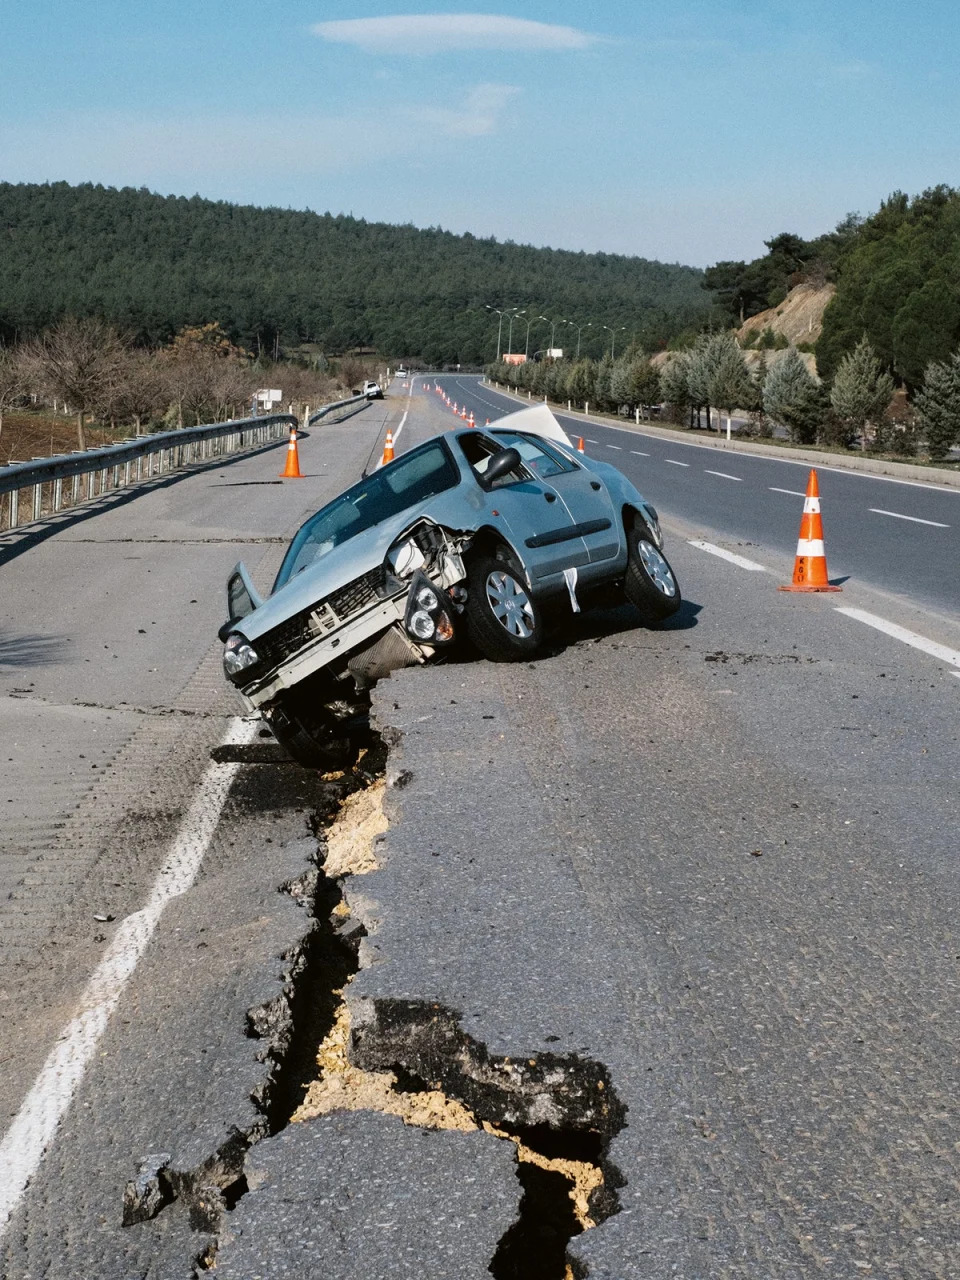 A car seen damaged on the broken highway road during the powerful earthquake on 8 February 2023 (Emin Ozmen/Magnum Photos)